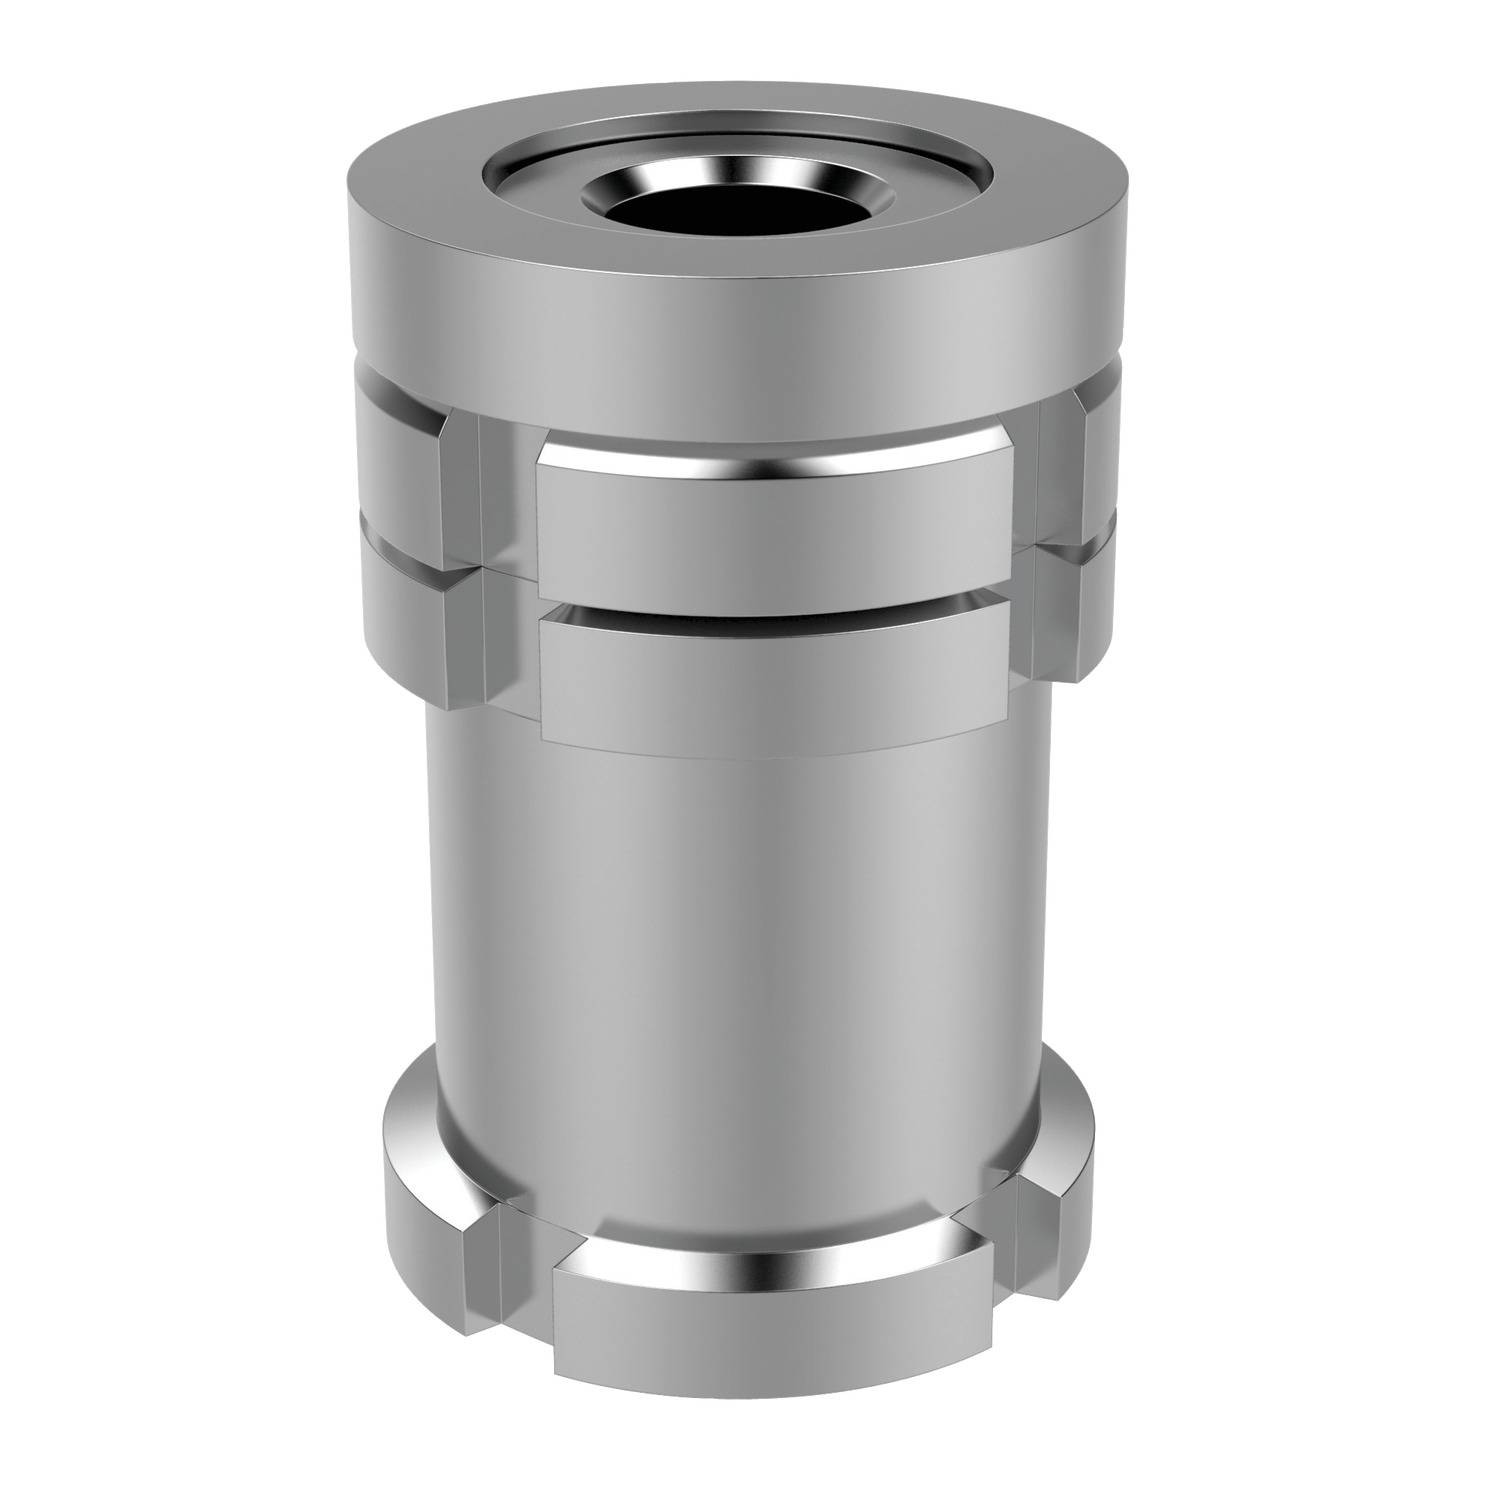 Tilt Head Precision Adjuster Tall design tilt head precision adjuster with locking nut. Designed for applications where a wide adjustment range is required from 15 to 40mm.